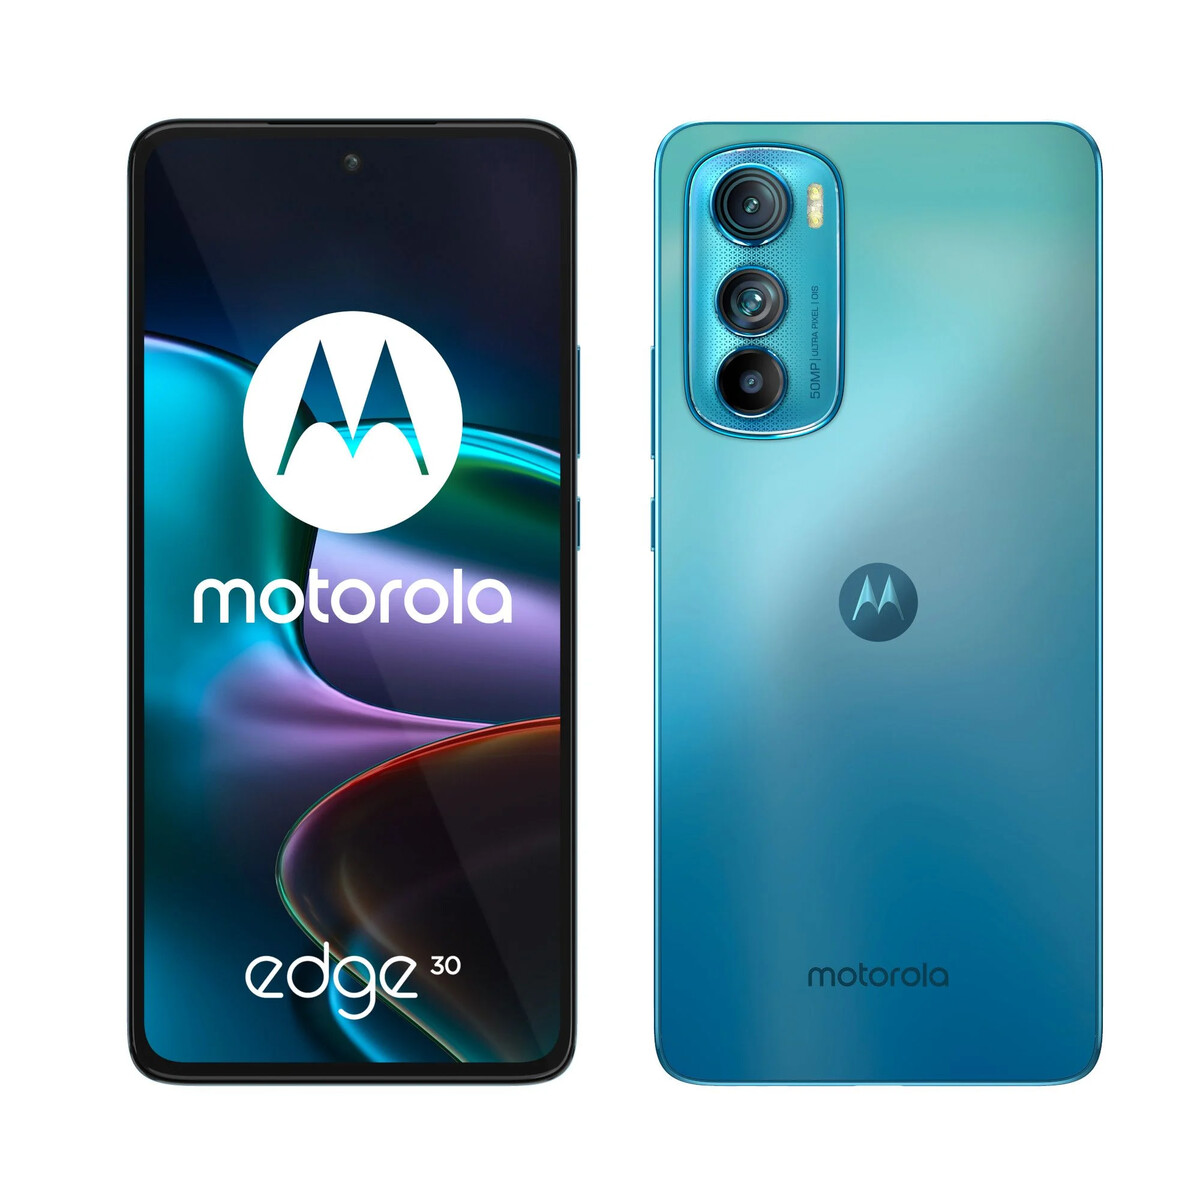 Motorola Edge smartphone with 144Hz OLED display gets colossal 50% discount  -  News